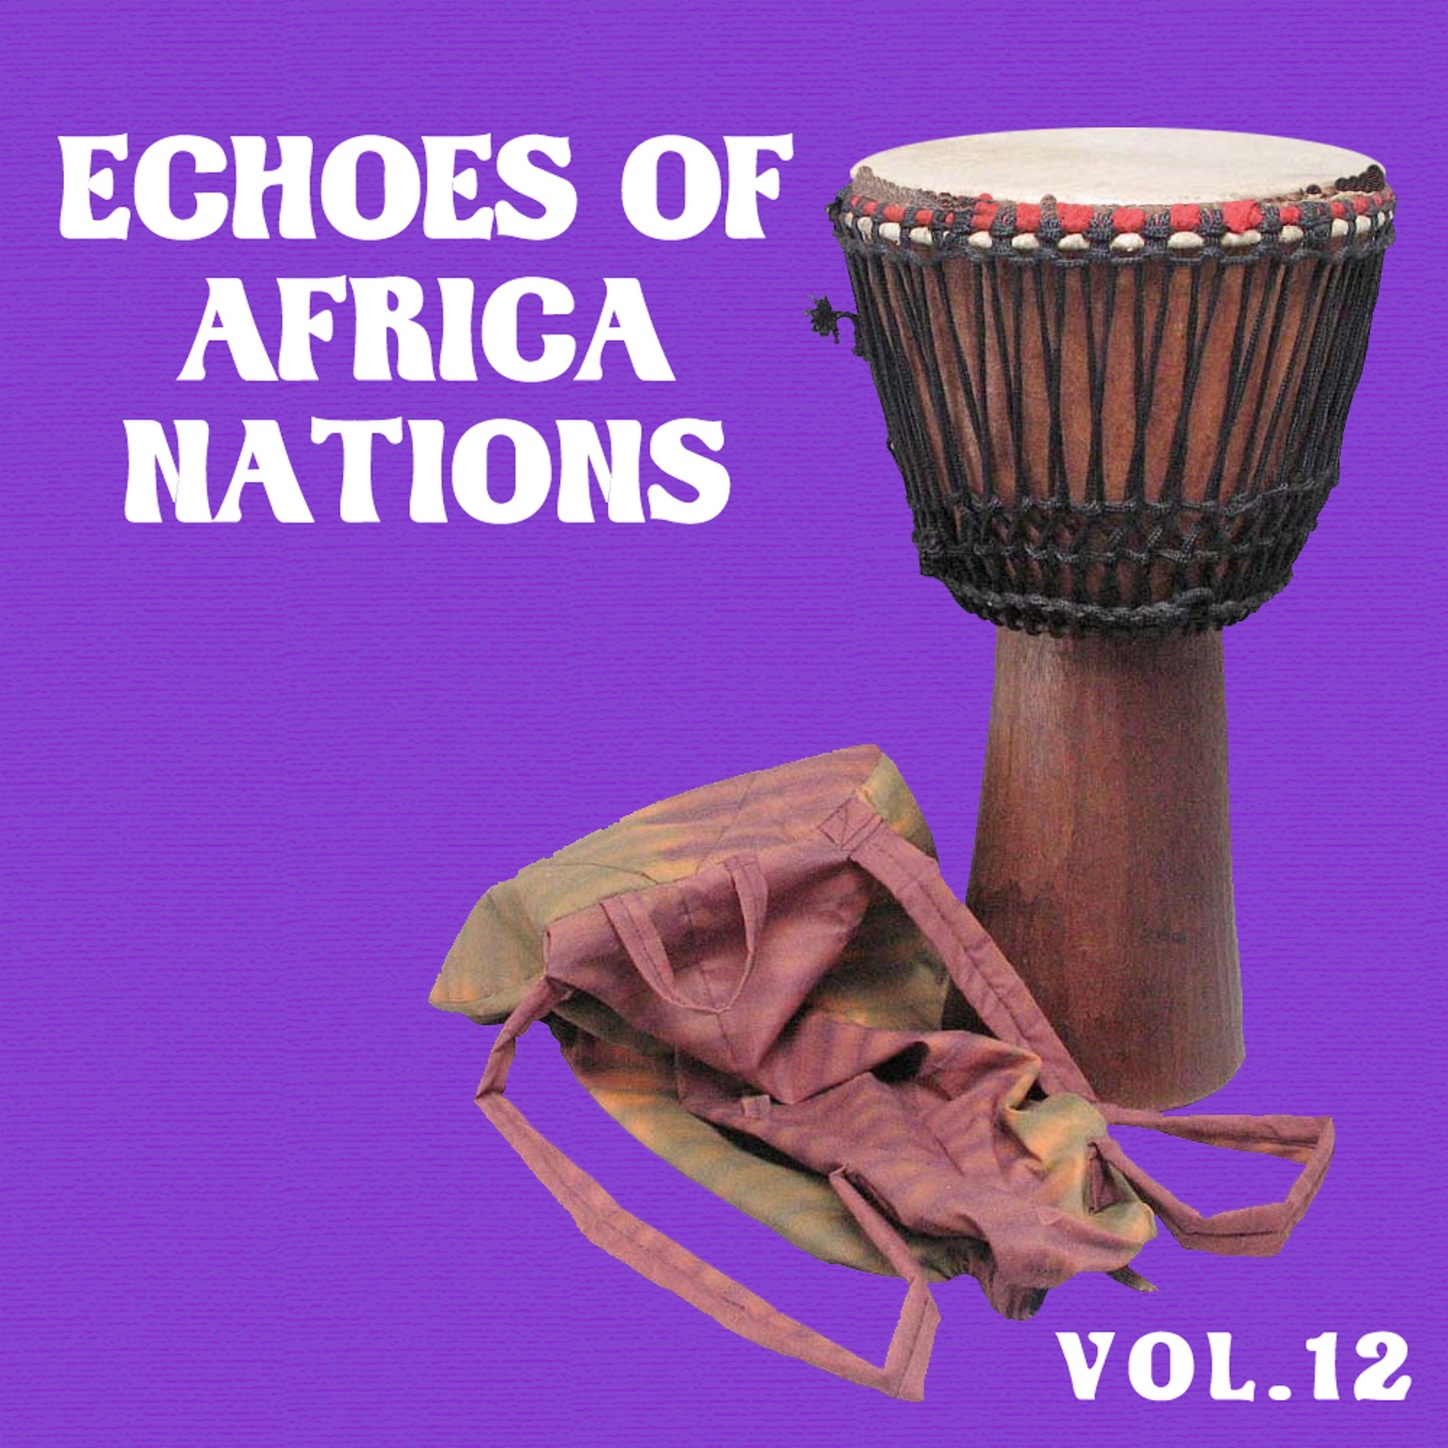 Echoes of African Nations Vol, 12